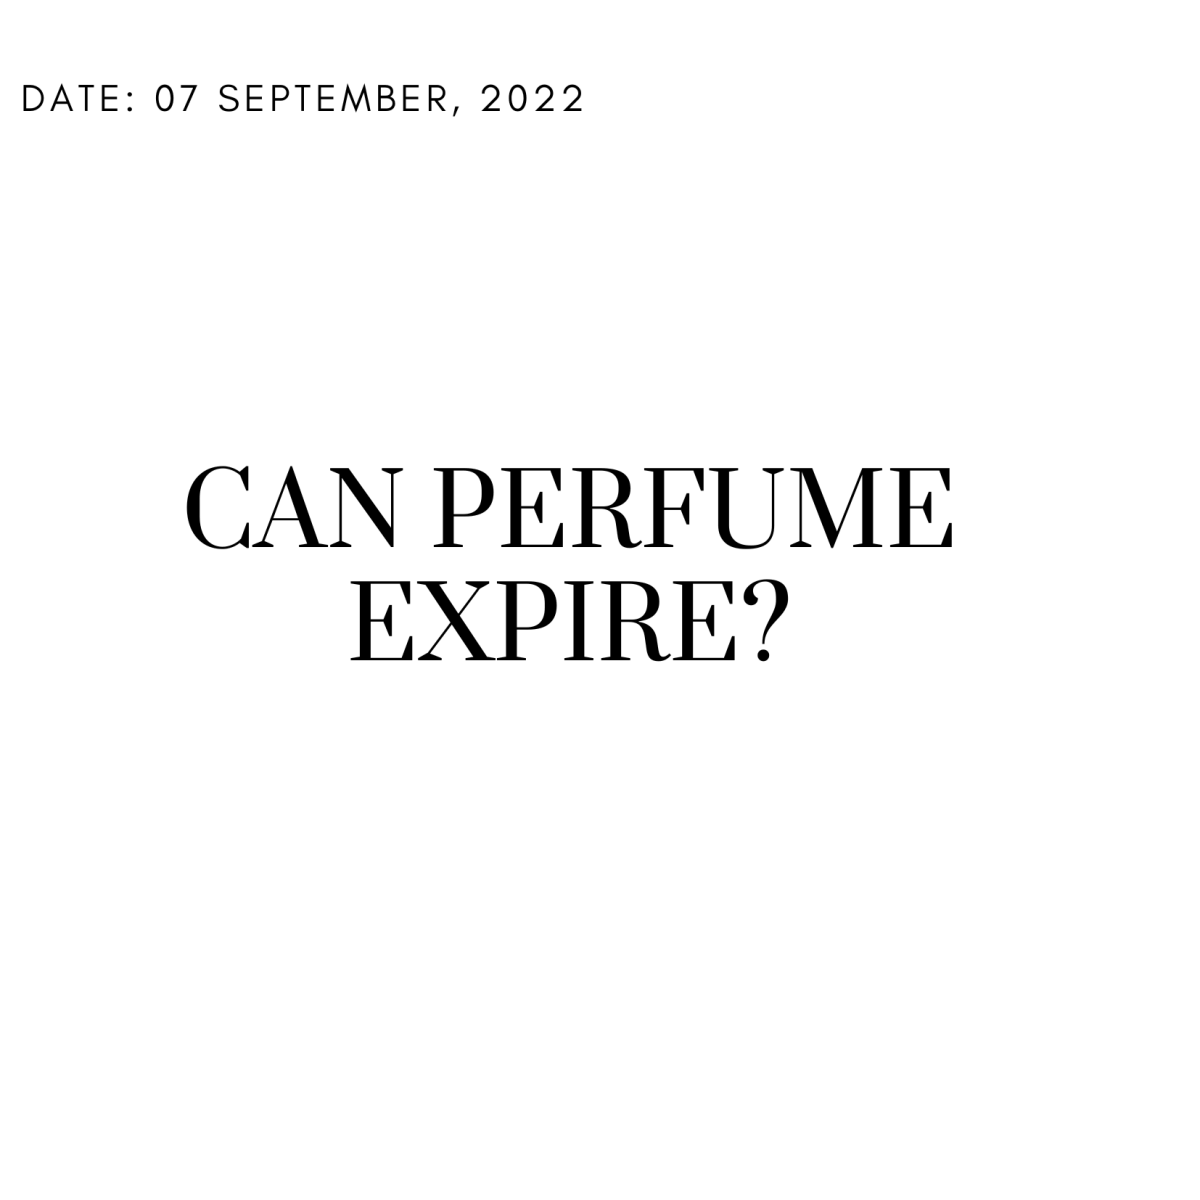 Check Batch Code and Expiration date on perfumes